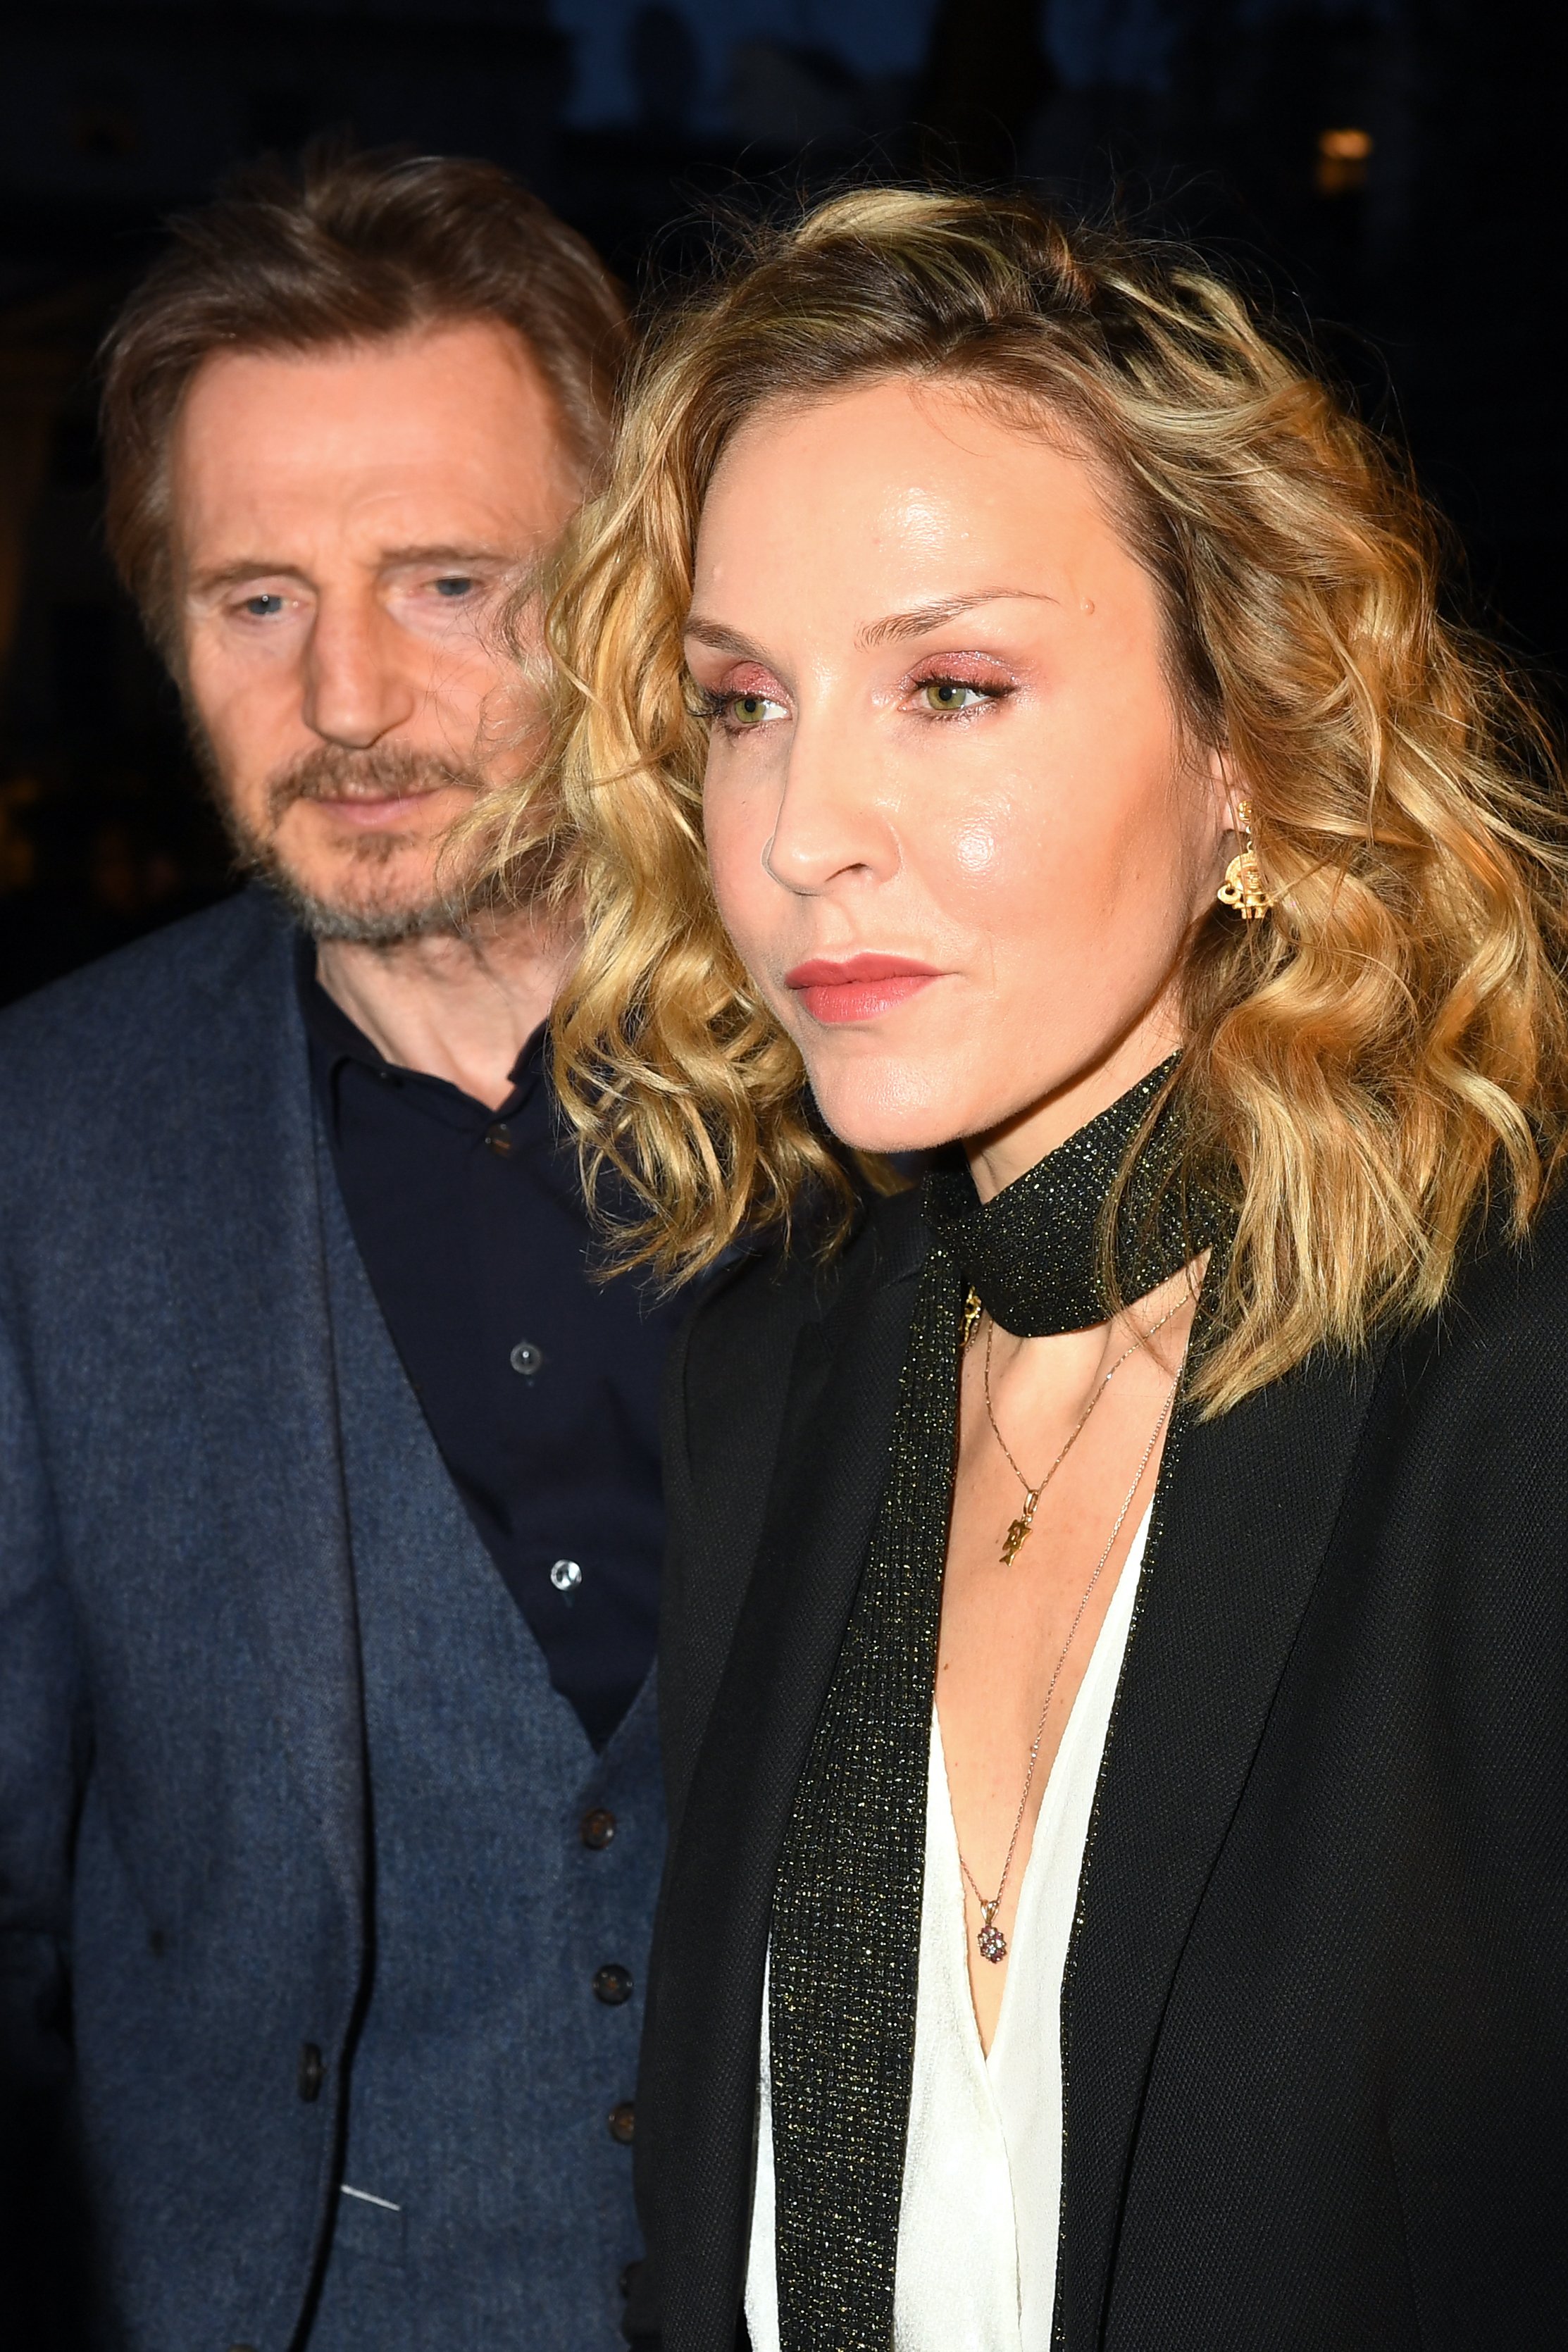 Liam Neeson and Freya St Johnston at The Curzon Mayfair on March 12, 2019 in London, England. | Source: Getty Images